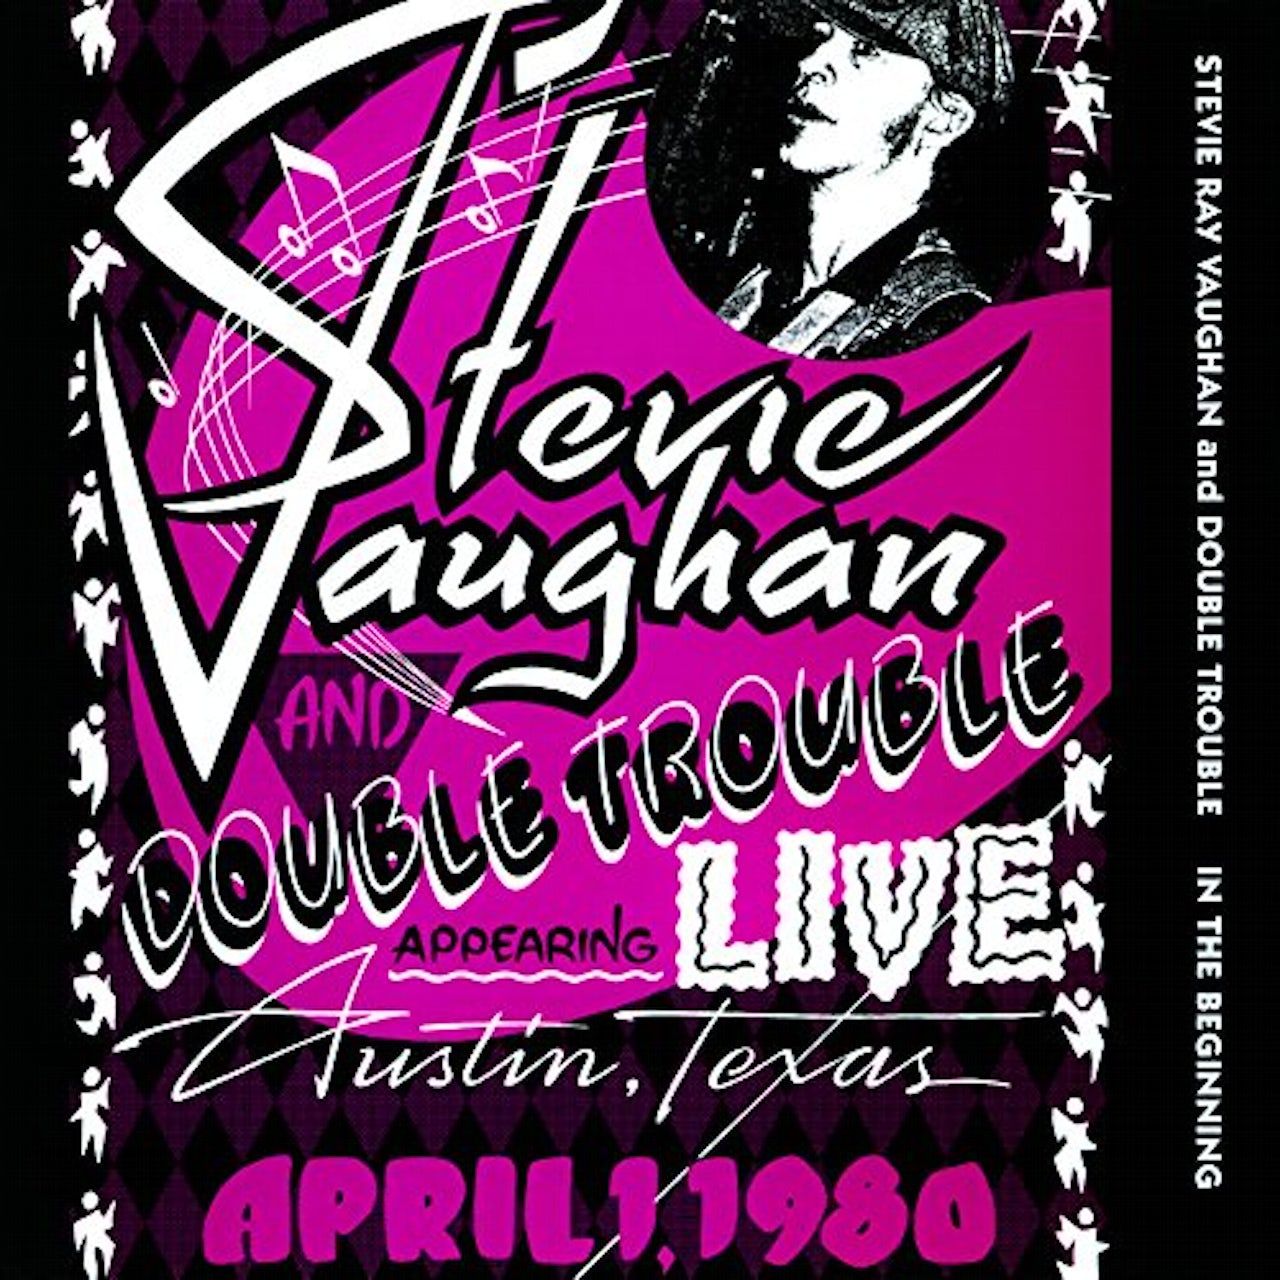 8719262001114, Виниловая пластинка Vaughan, Stevie Ray, In The Beginning stine r l they call me the night howler